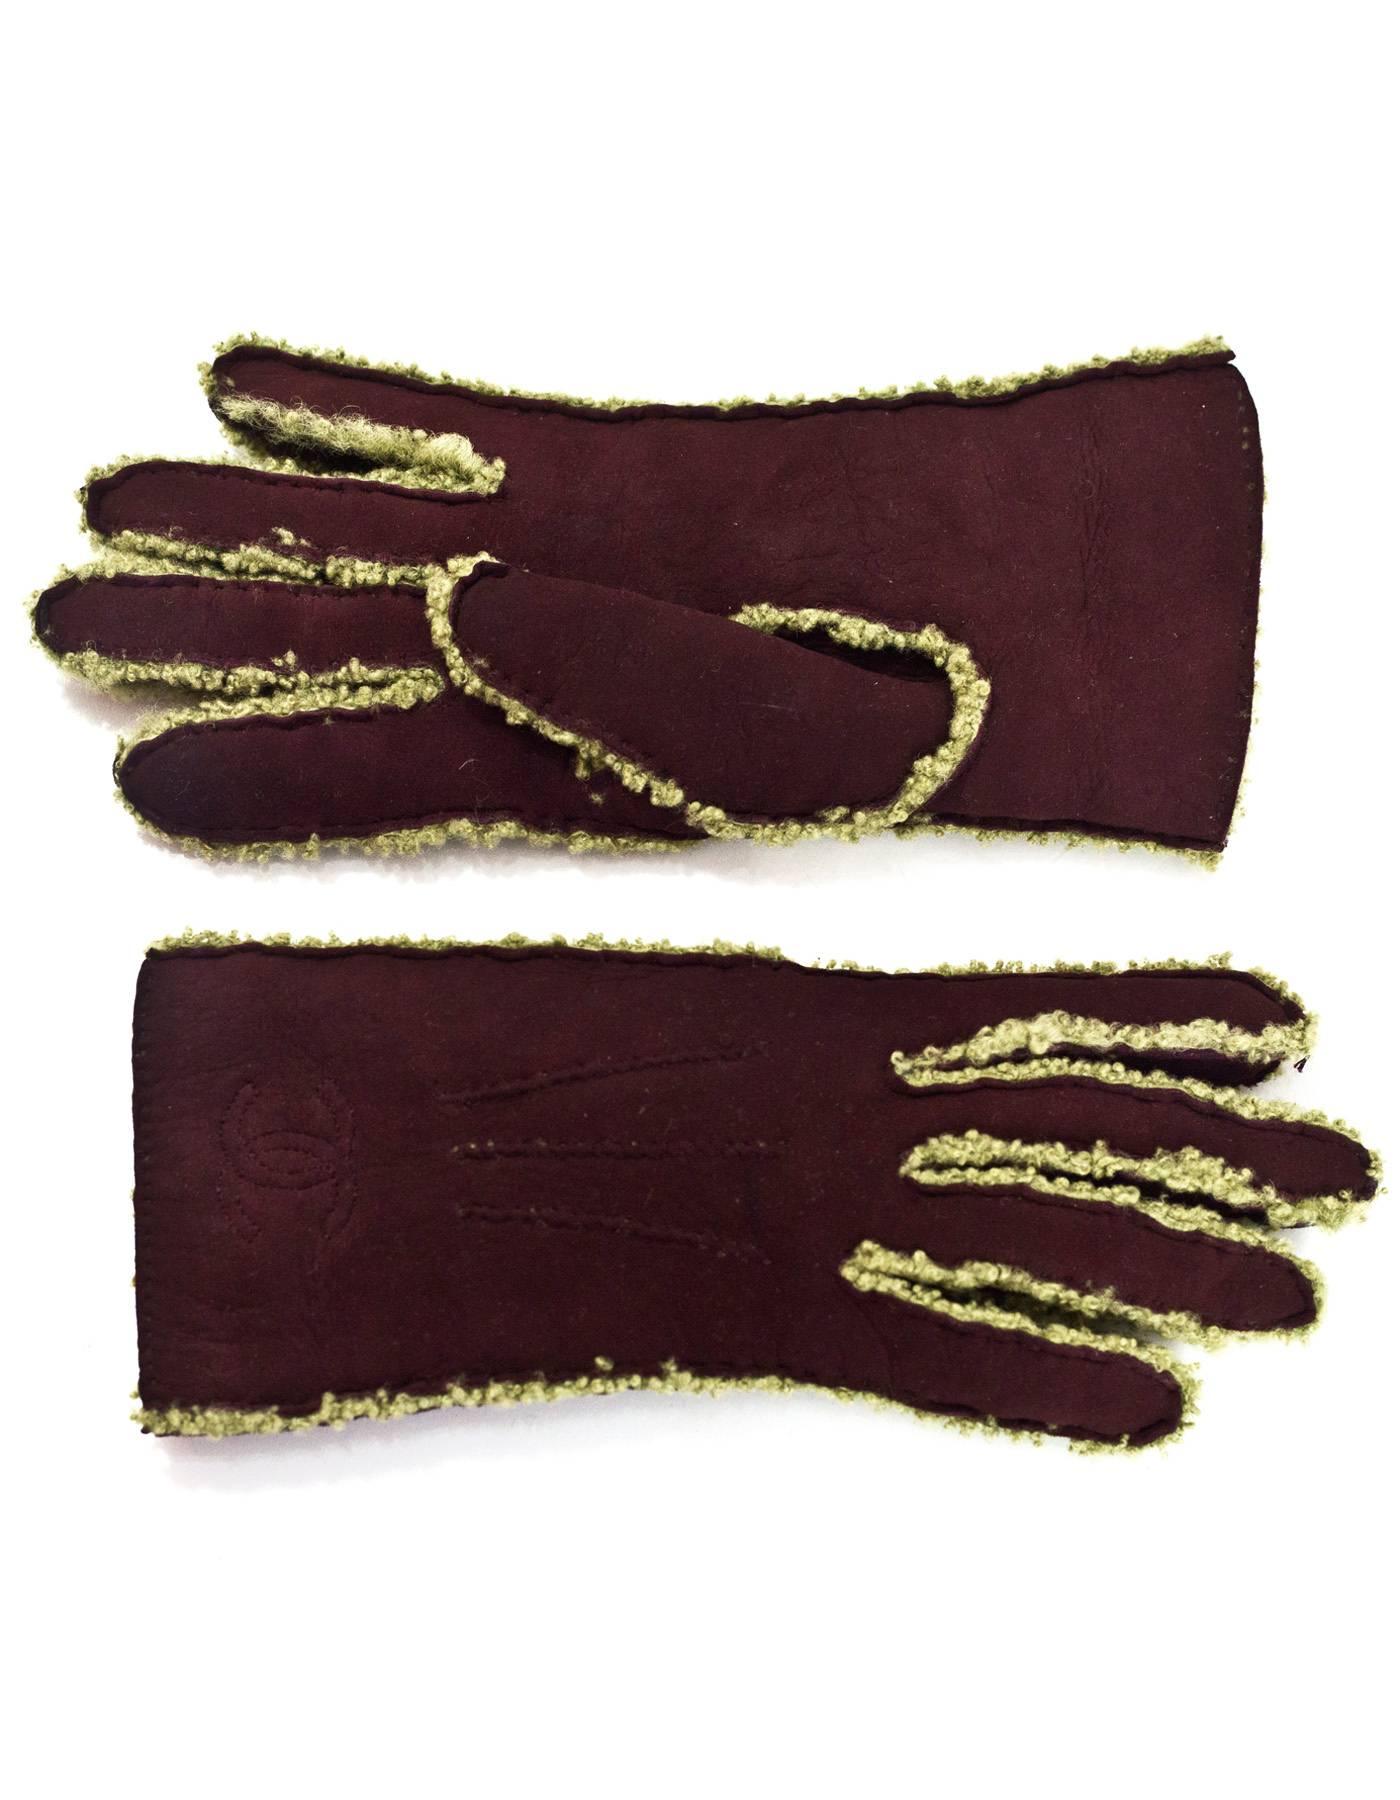 Chanel Brown & Green Gloves Sz 7.5
Features stitched CC

Color: Brown, green
Materials: Shearling
Closure: None
Overall Condition: Excellent pre-owned condition, gentle wear/light discoloration

Marked Size: 7.5
Length (middle finger- hemline):